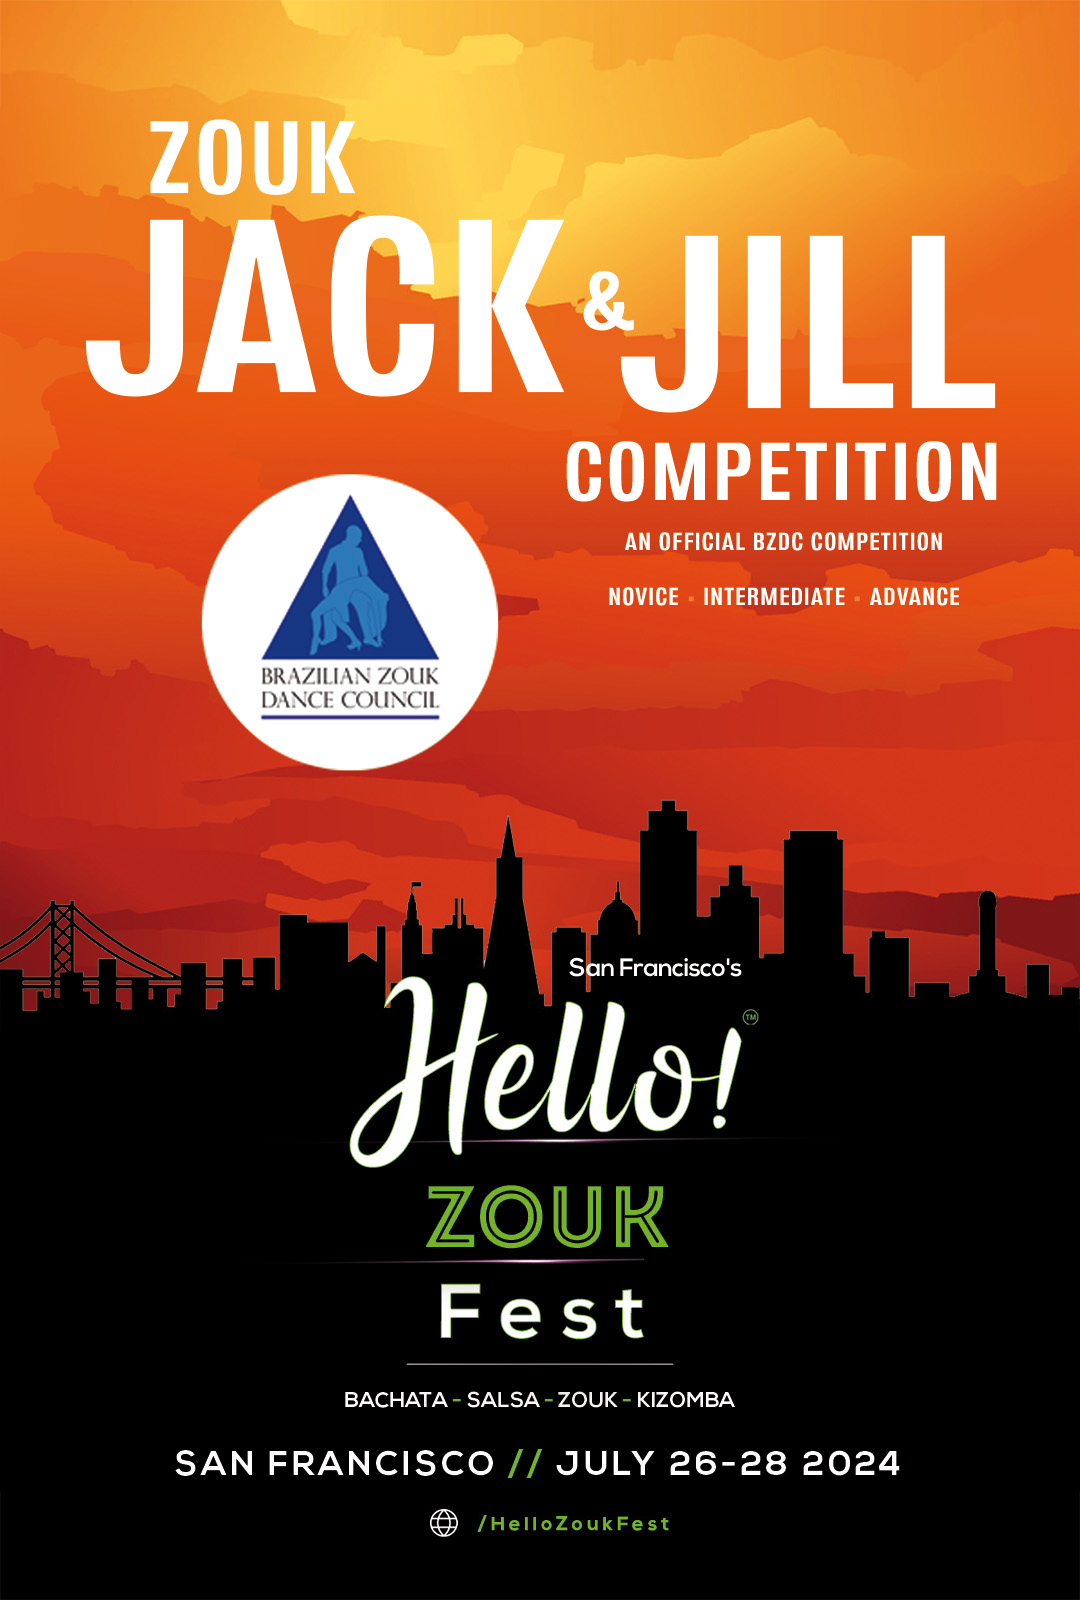 Zouk jack and jill competition in San Francisco